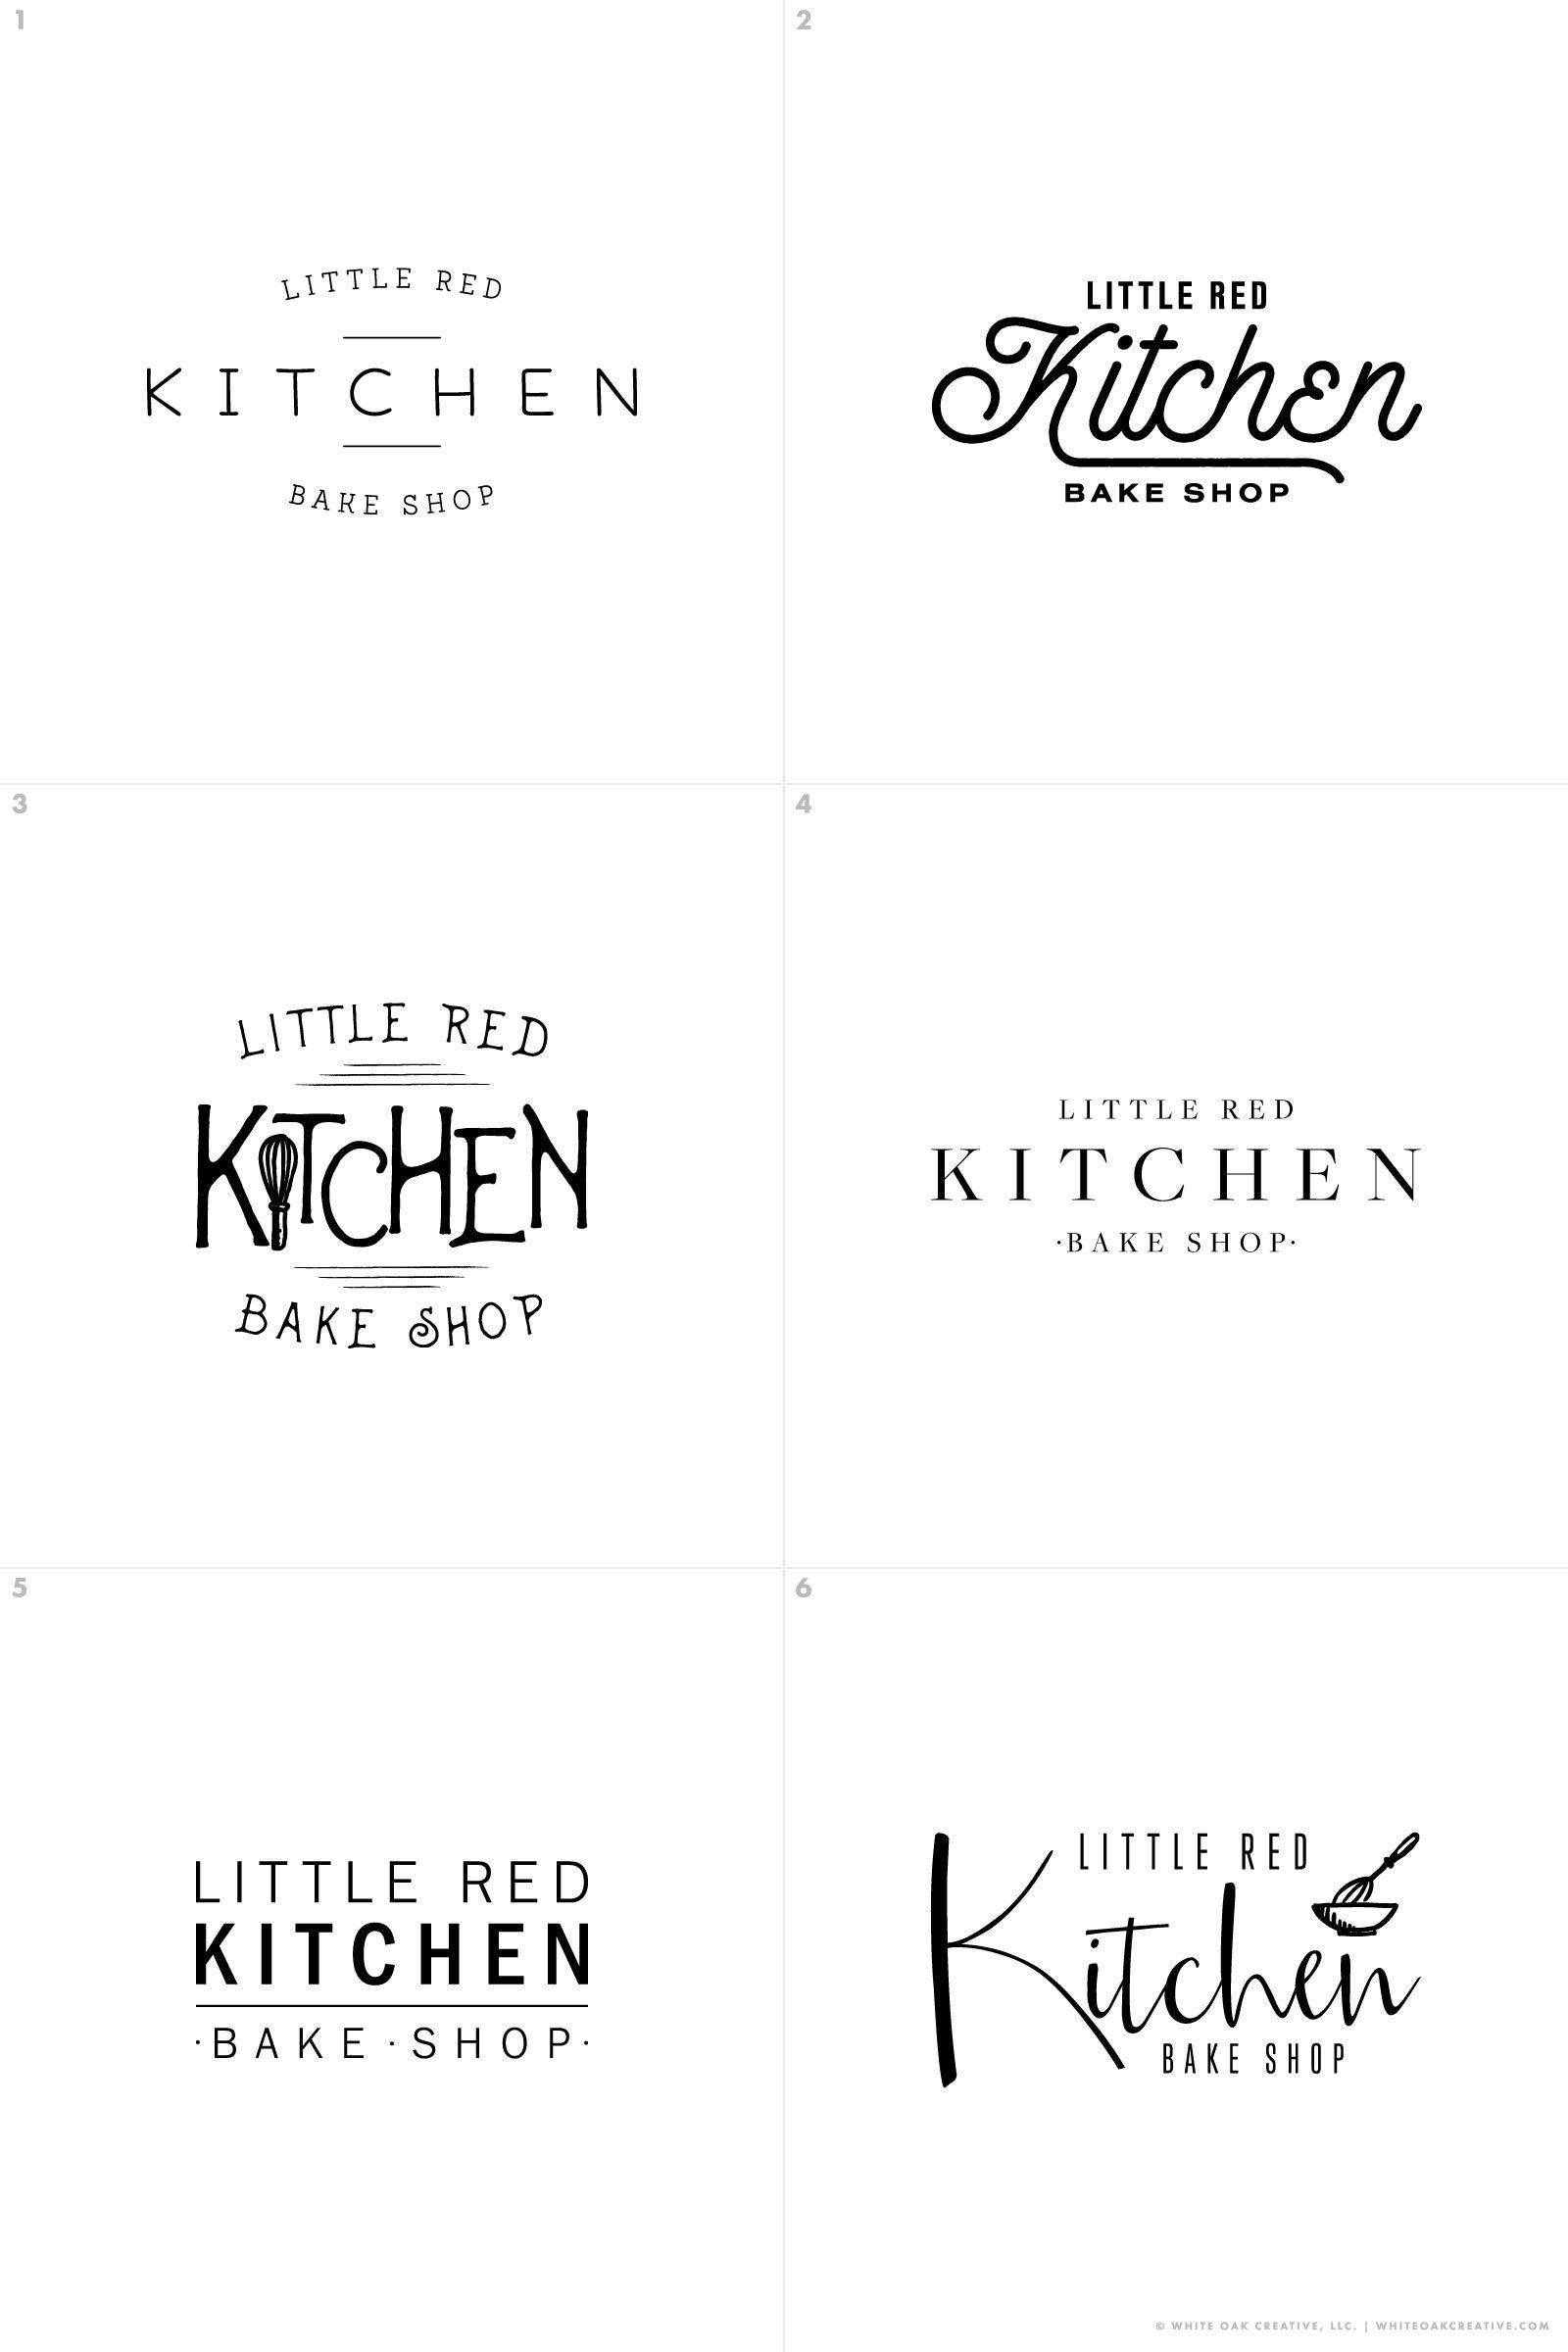 Red and White Food Logo - Little Red Kitchen Bake Shop. Typography. Logo design